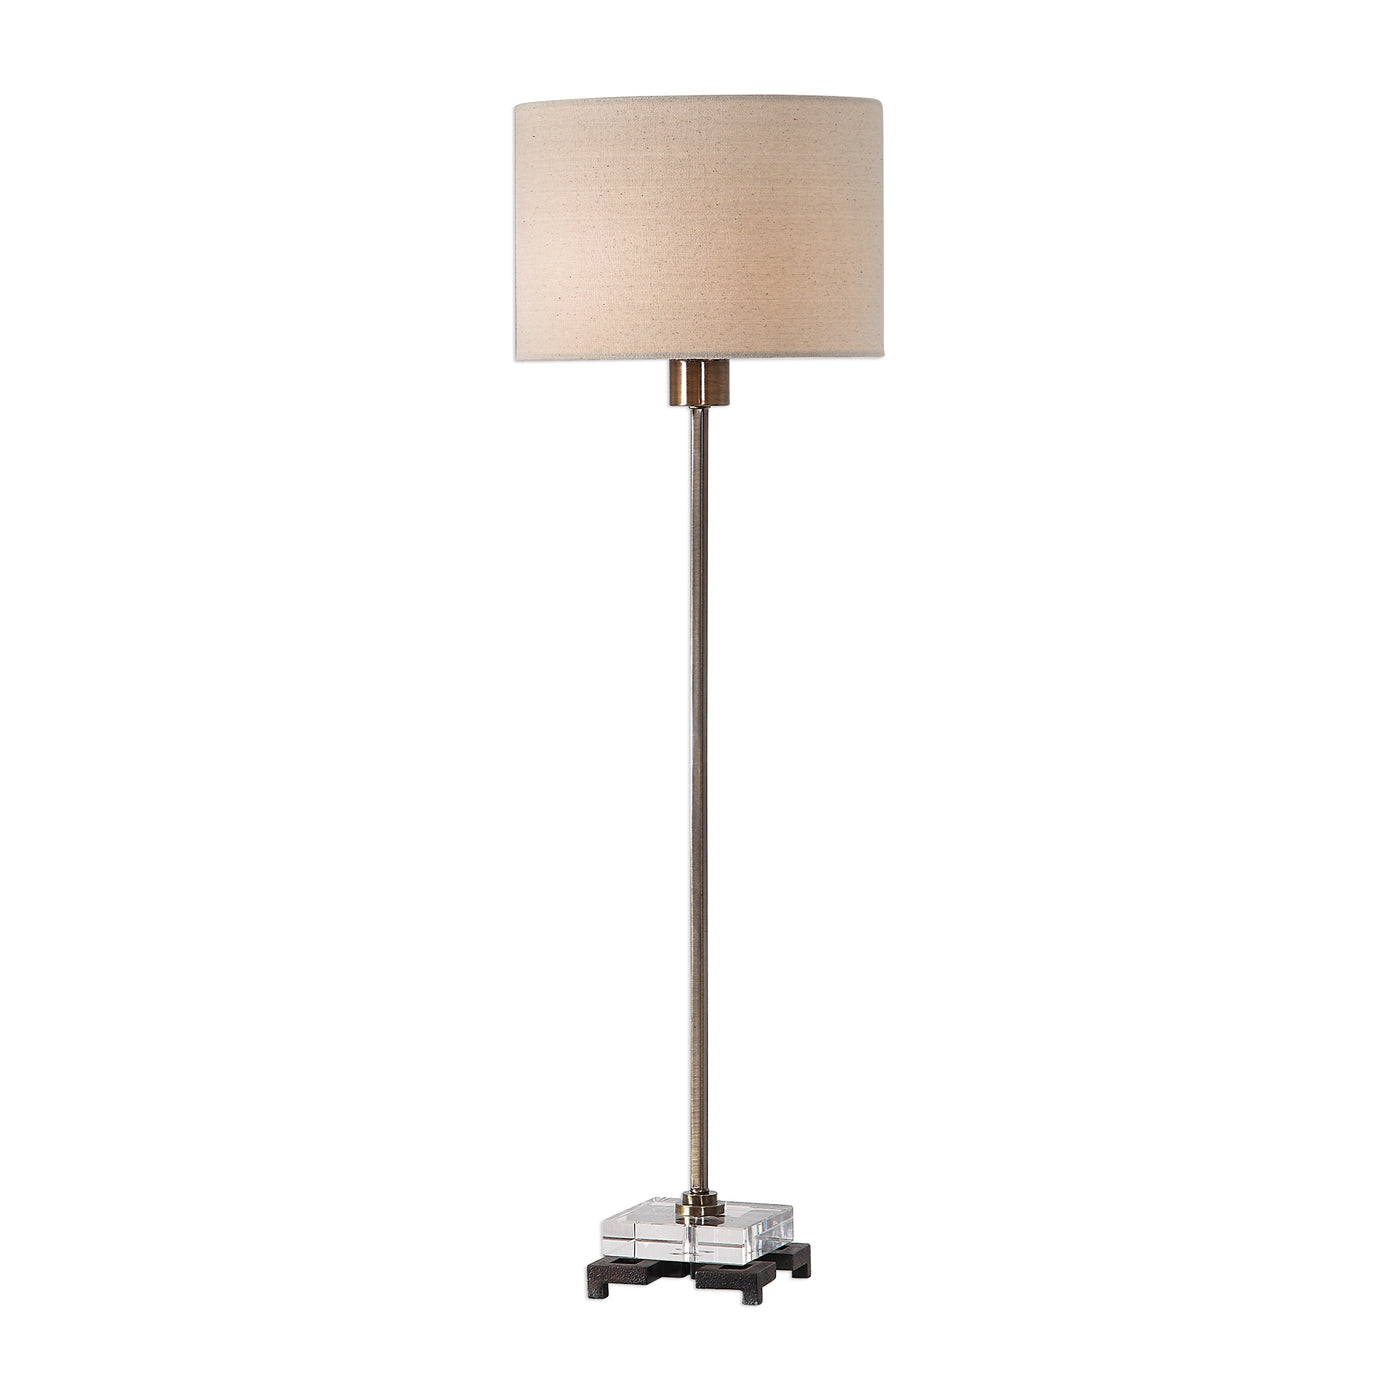 This Simple, Contemporary Table Lamp Features Clean Lines And A Versatile Style. The Iron Base Is Finished In A Plated Ant...